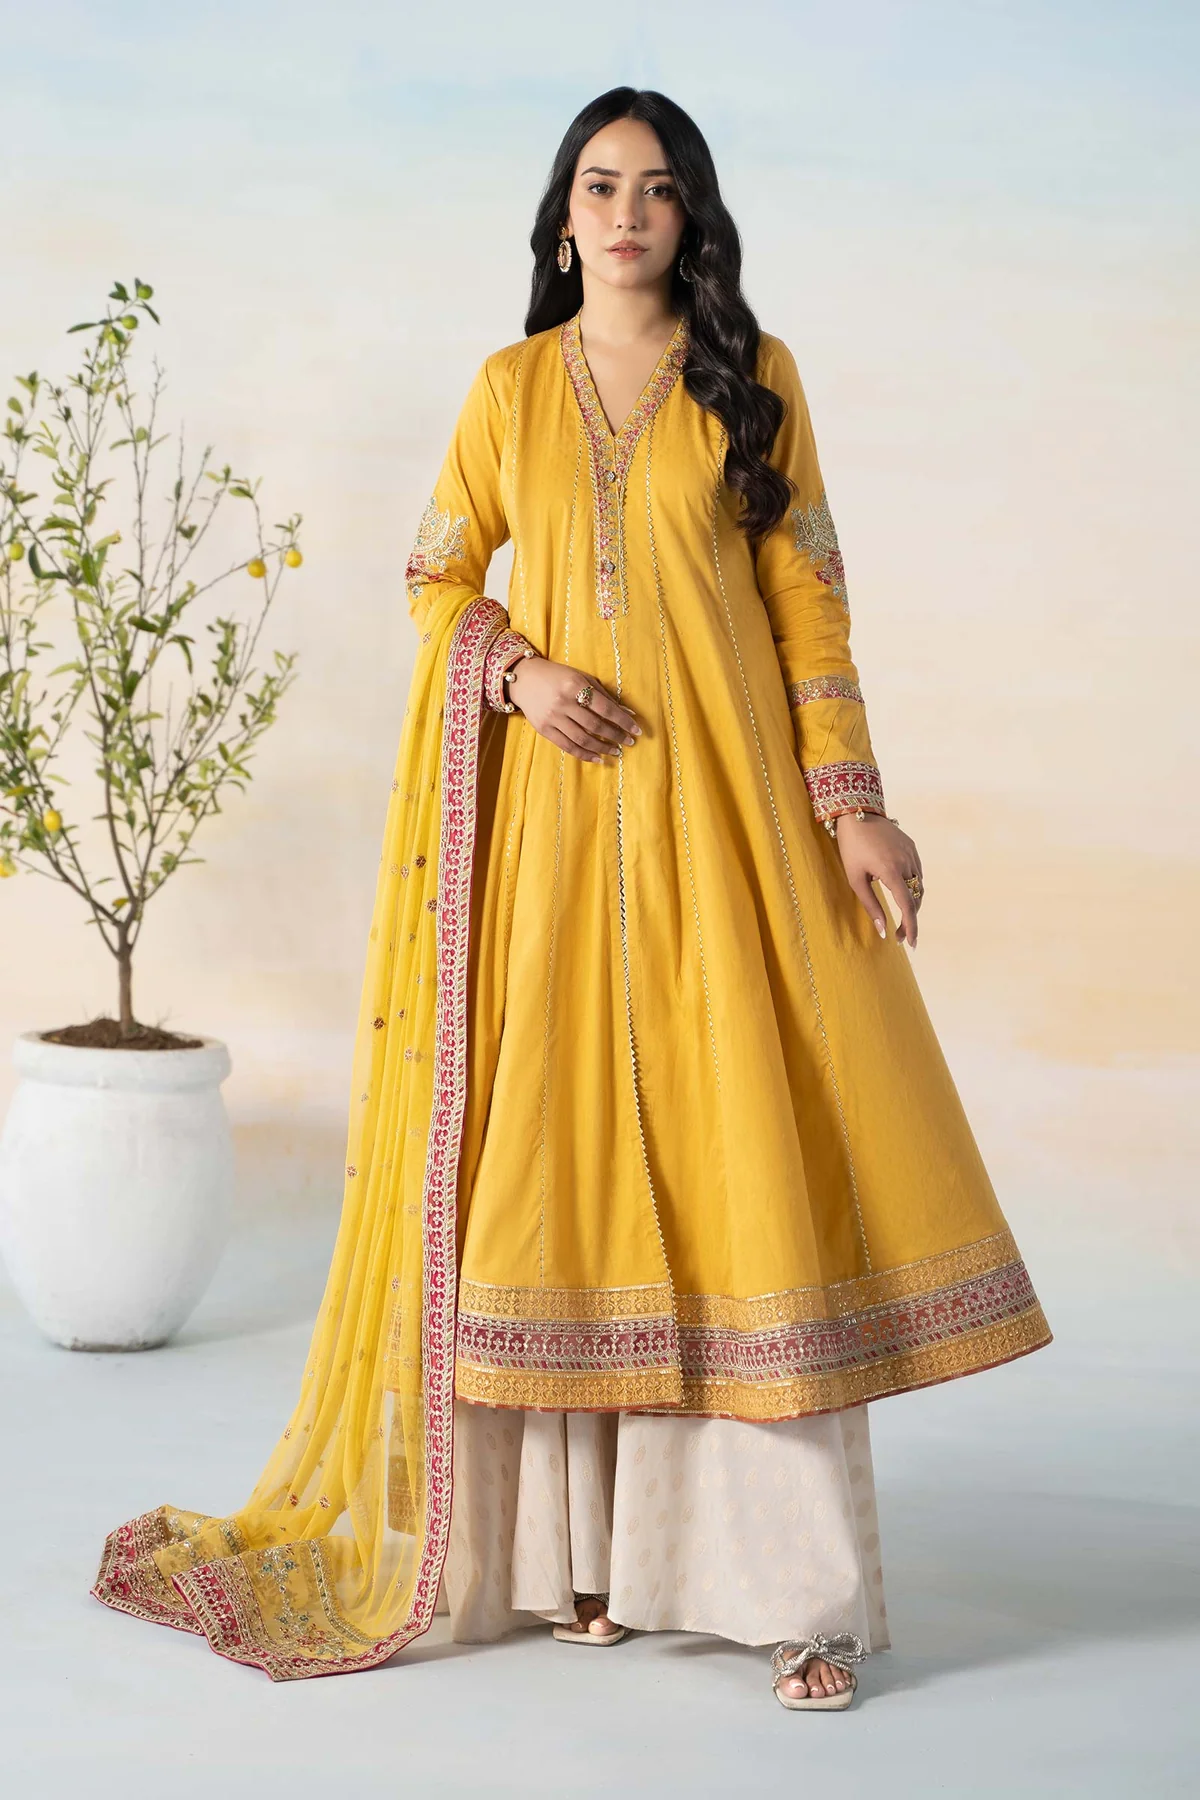 Maria B 3 PIECE EMBROIDERED DOBBY Yellow Color SUIT